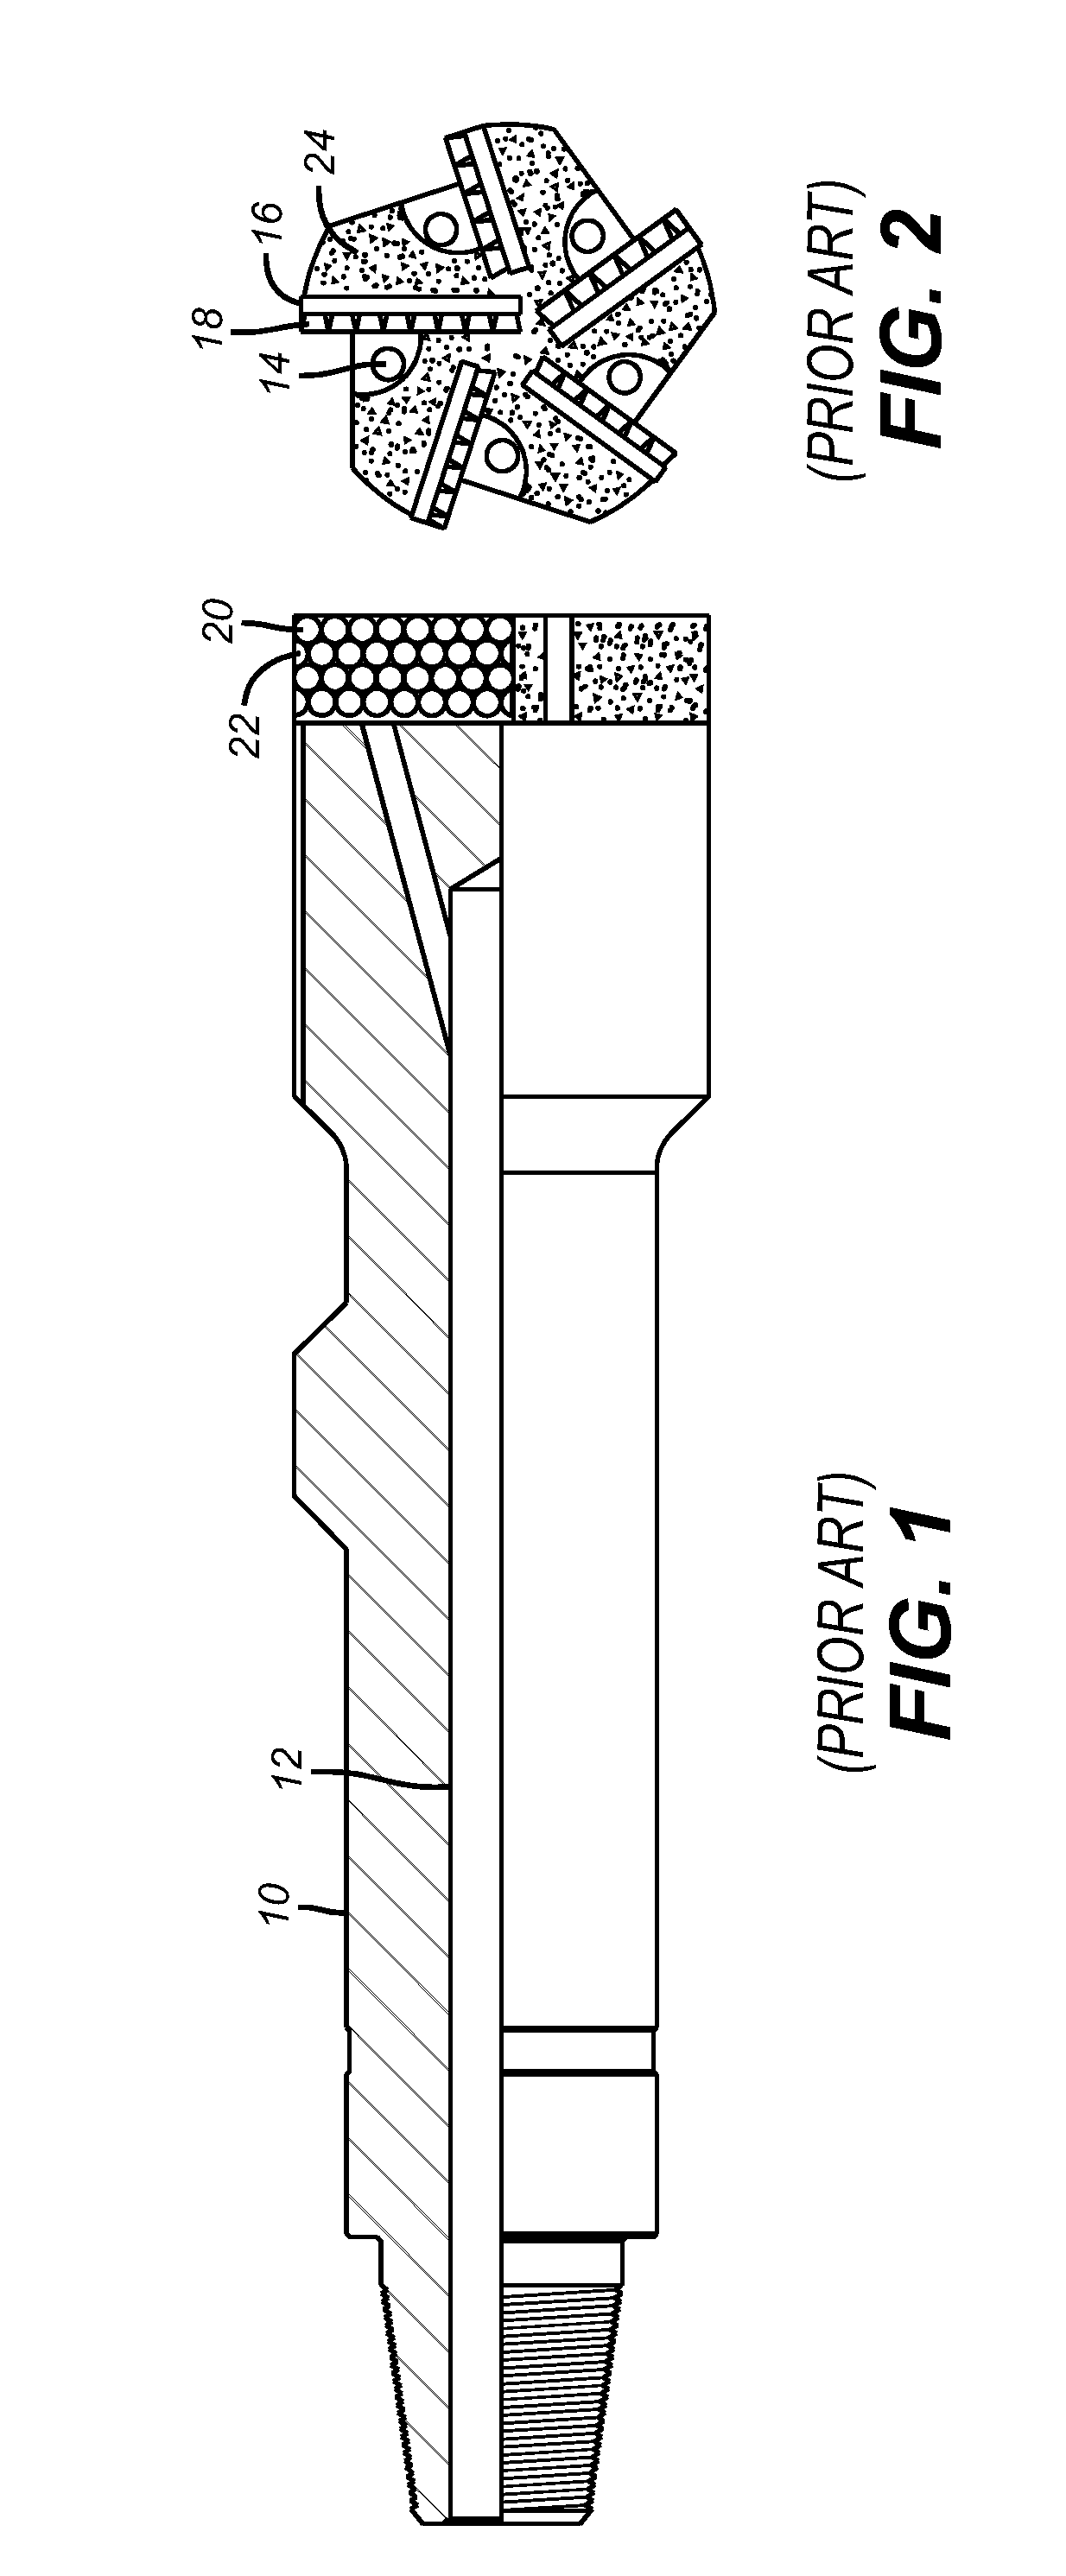 Subterranean Cutting Tool Structure Tailored to Intended Use